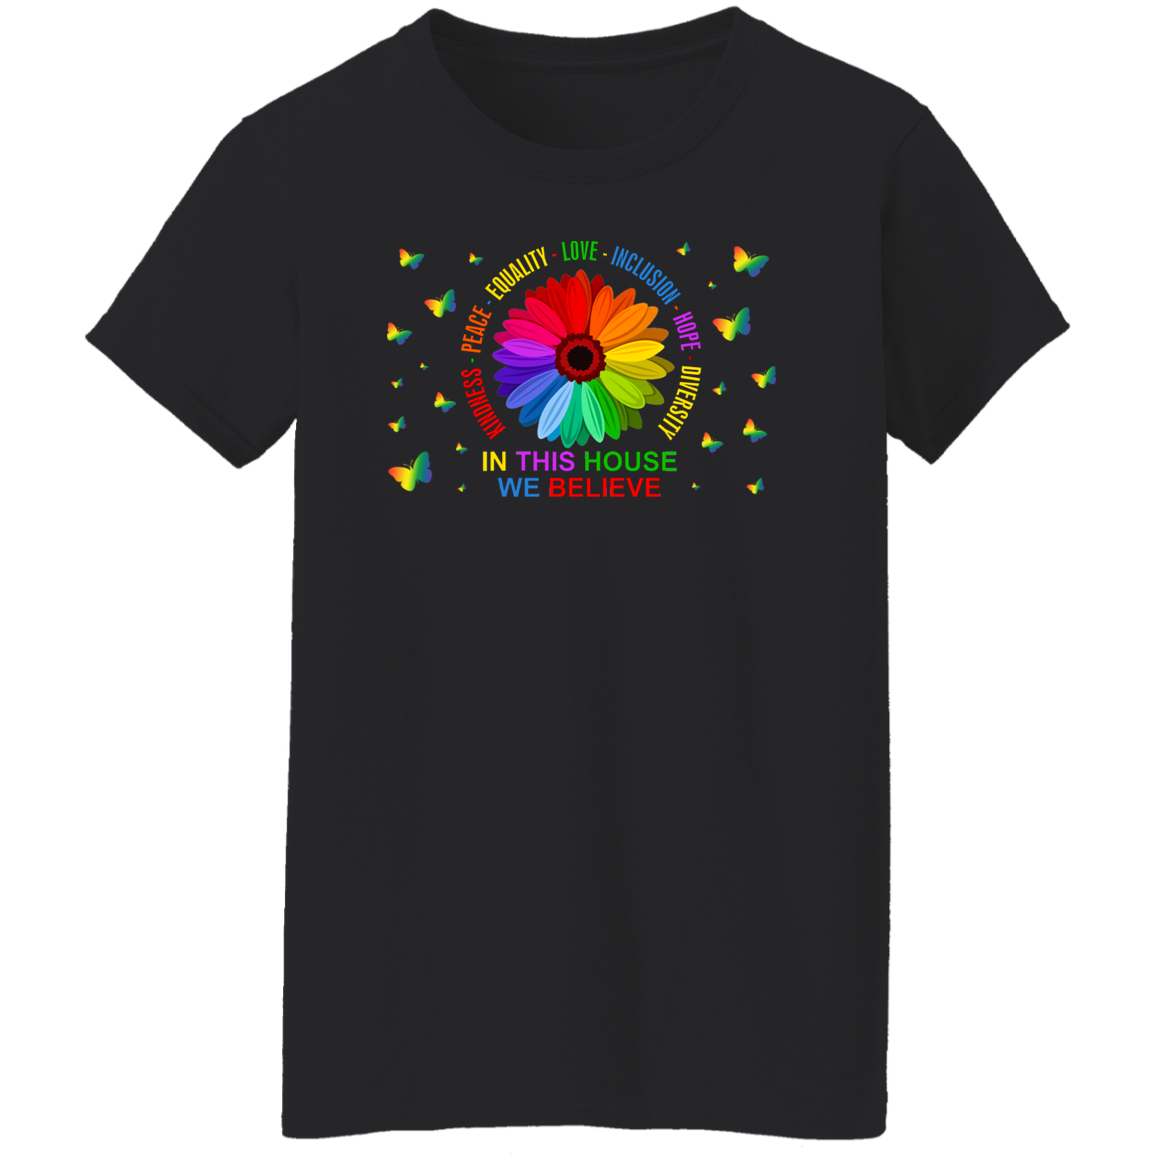 Kindness peace equality love inclusion butterfly shirt